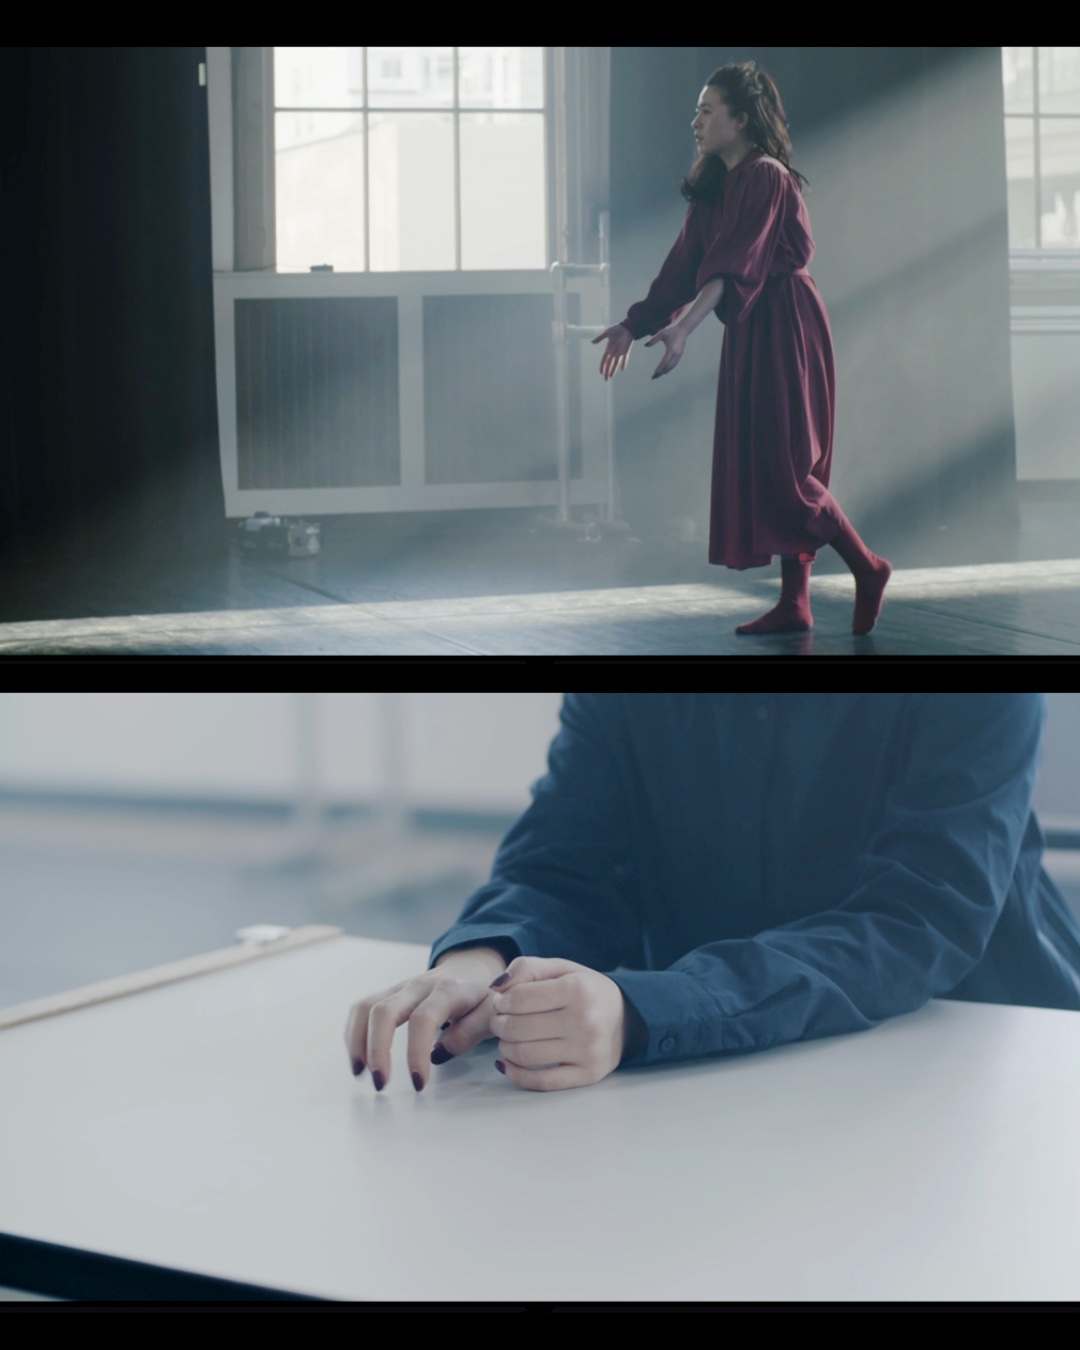 Screenshots of dancer and choreographer Mengchen Liu performing to the song “Footprints” by Adam Maalouf